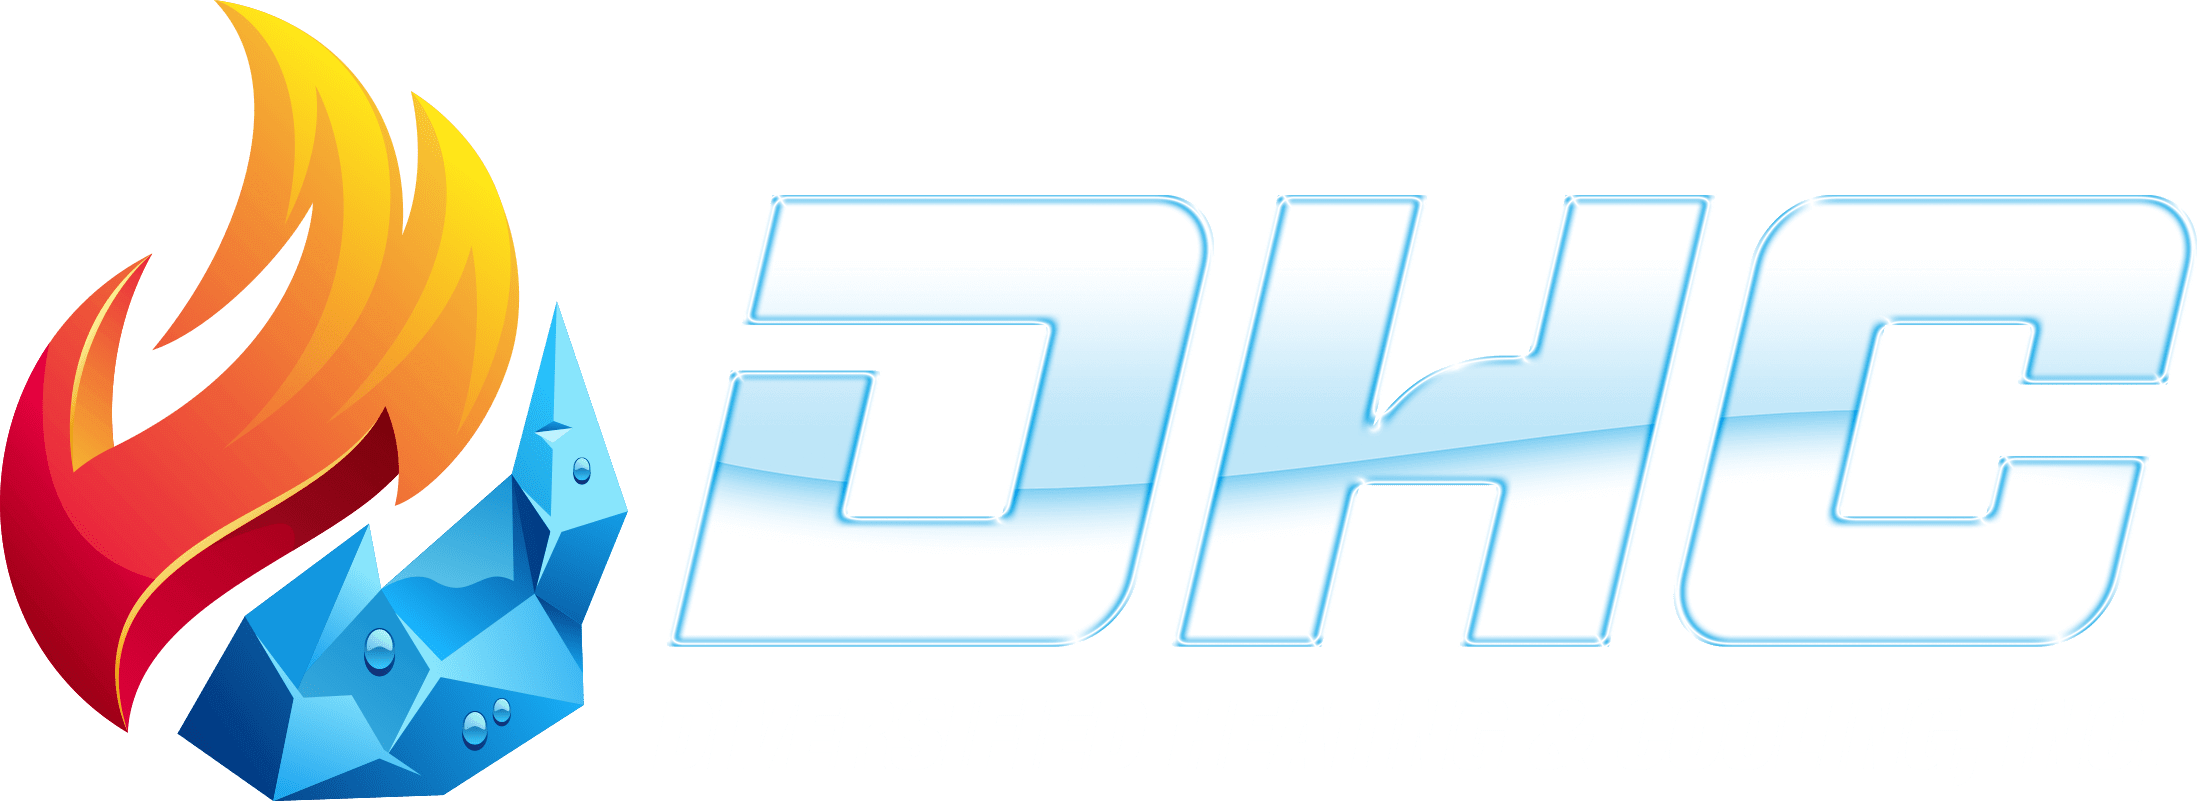 See what makes Diversified Heating & Cooling, Inc. your number one choice for Ductless AC repair in Troy MI.